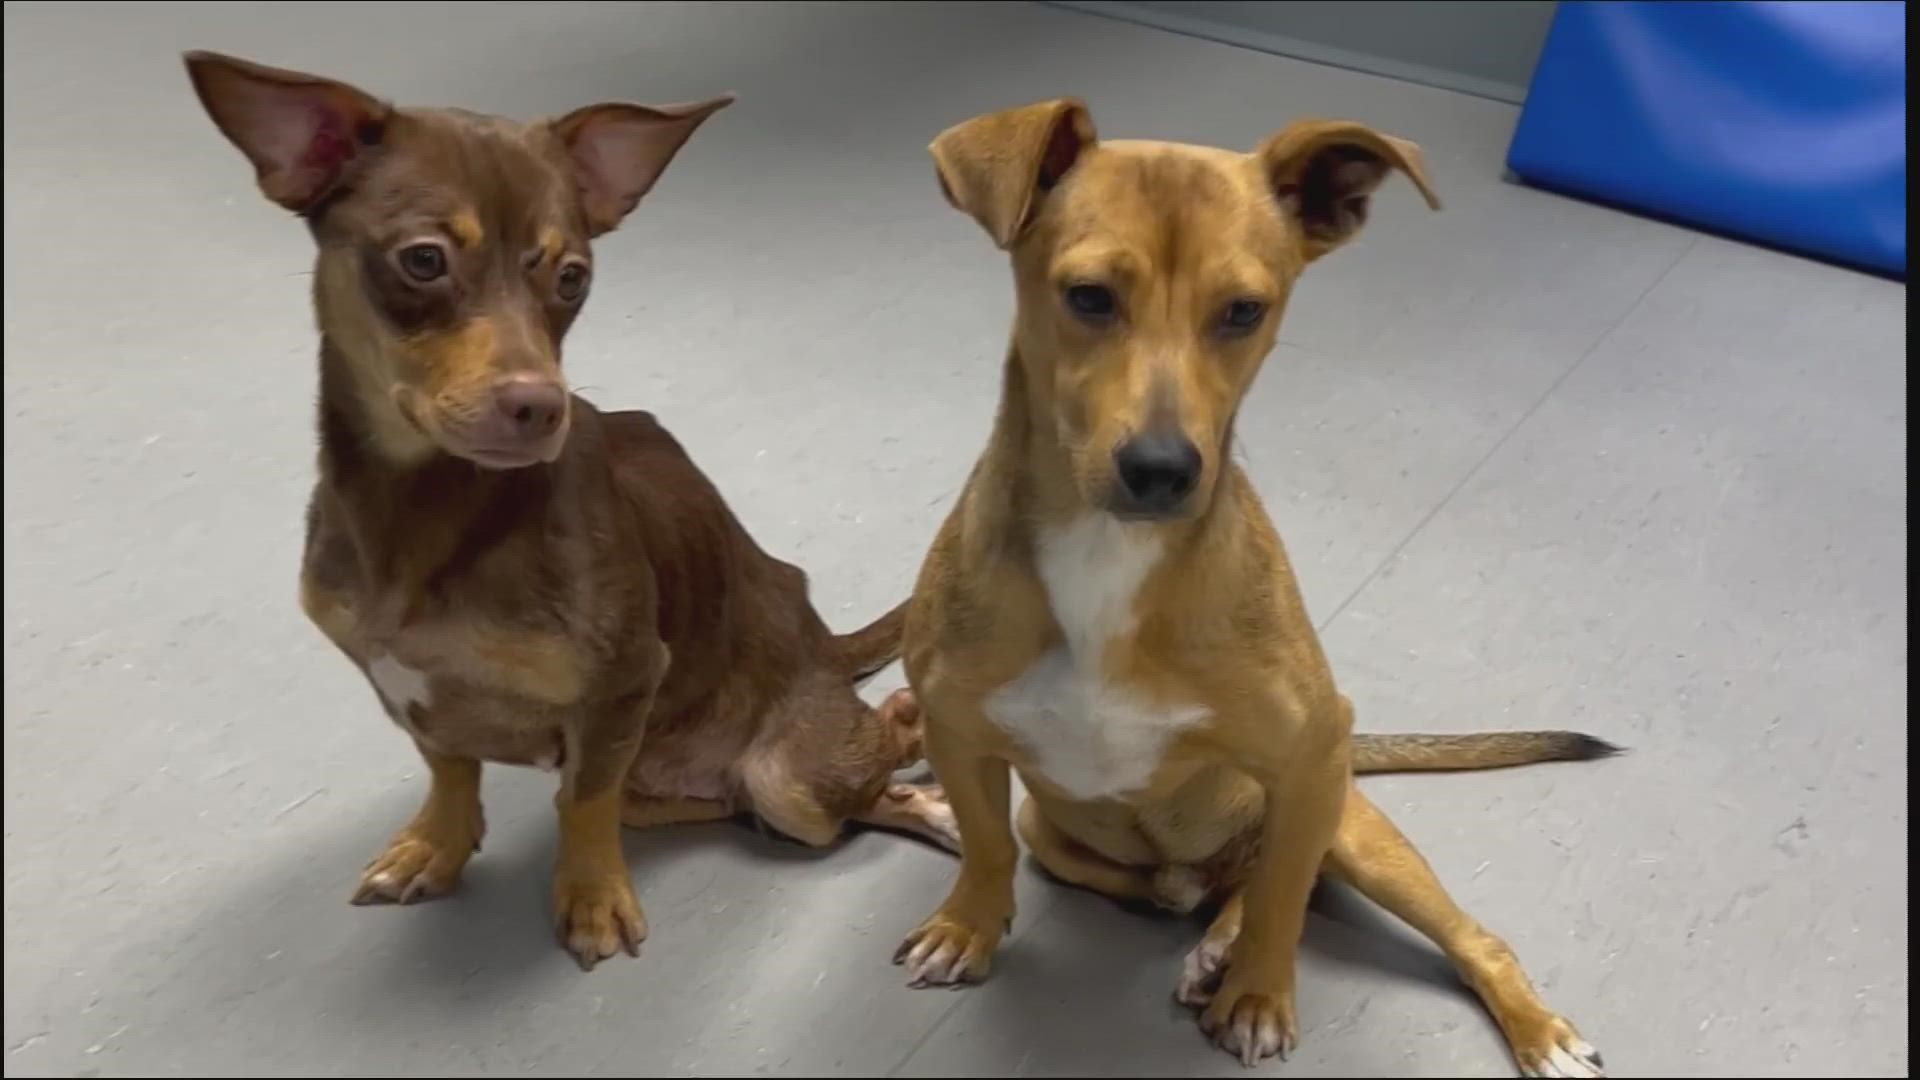 FUR, Florida Urgent Rescue, founder Mike Merrill says animal abuse numbers have jumped since the pandemic. But there's help for Spartacus and his buddy, Byrdie.